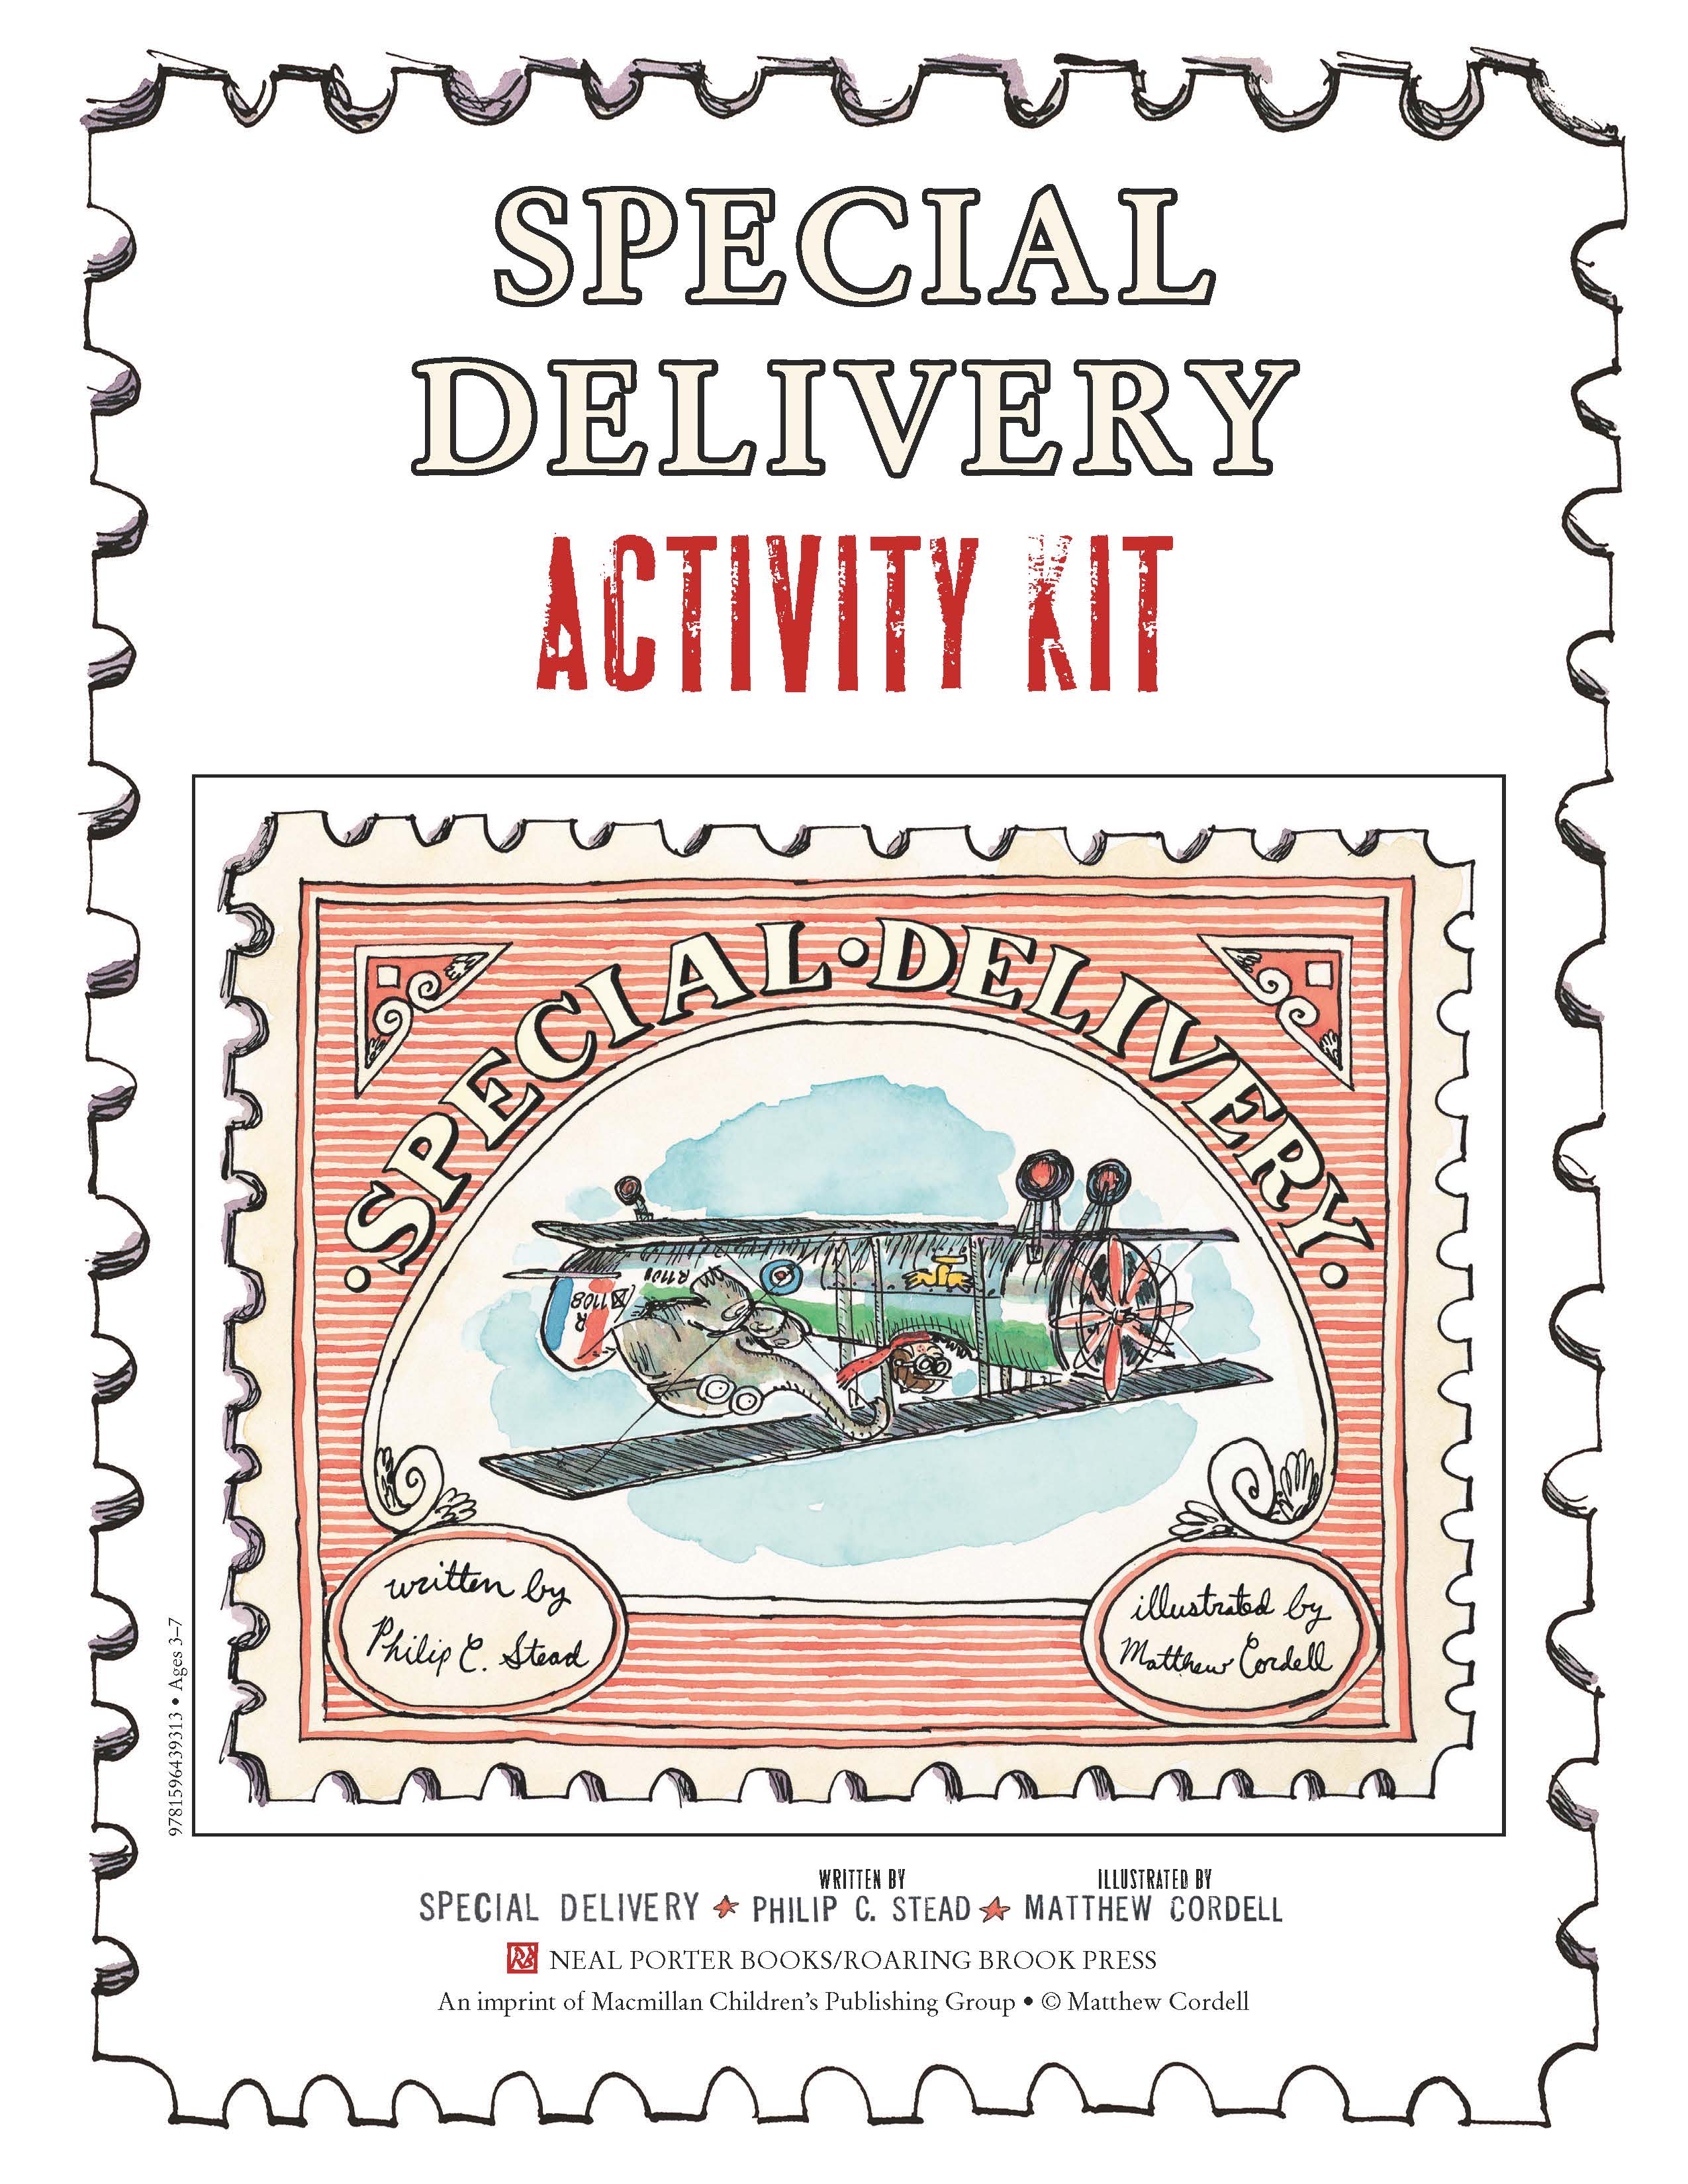 pages-from-special-delivery-activity-kit_v2